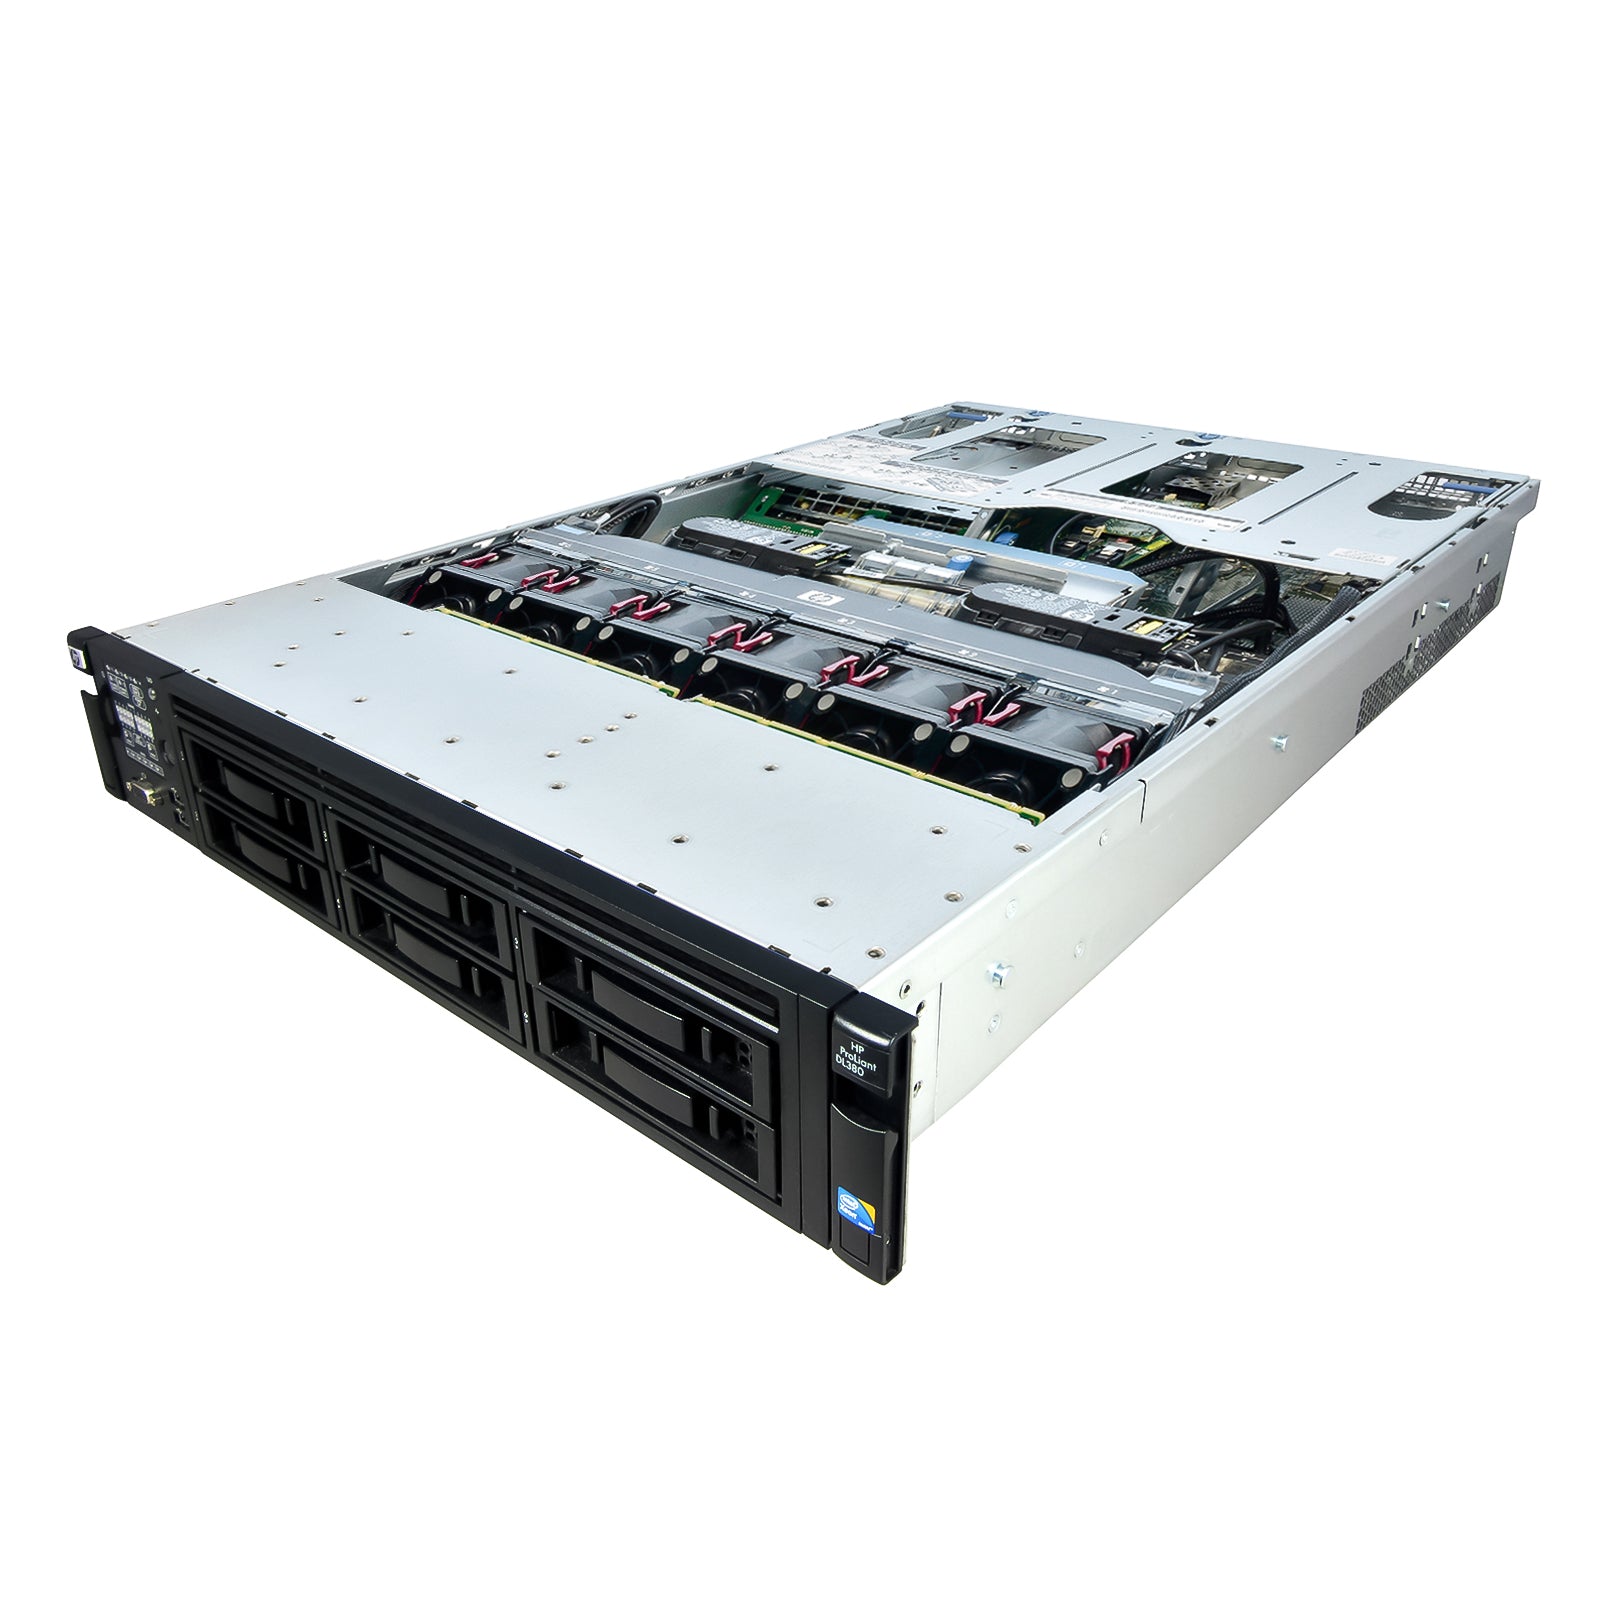 HP ProLiant DL380 Hard Drive & Chassis | TechMikeNY